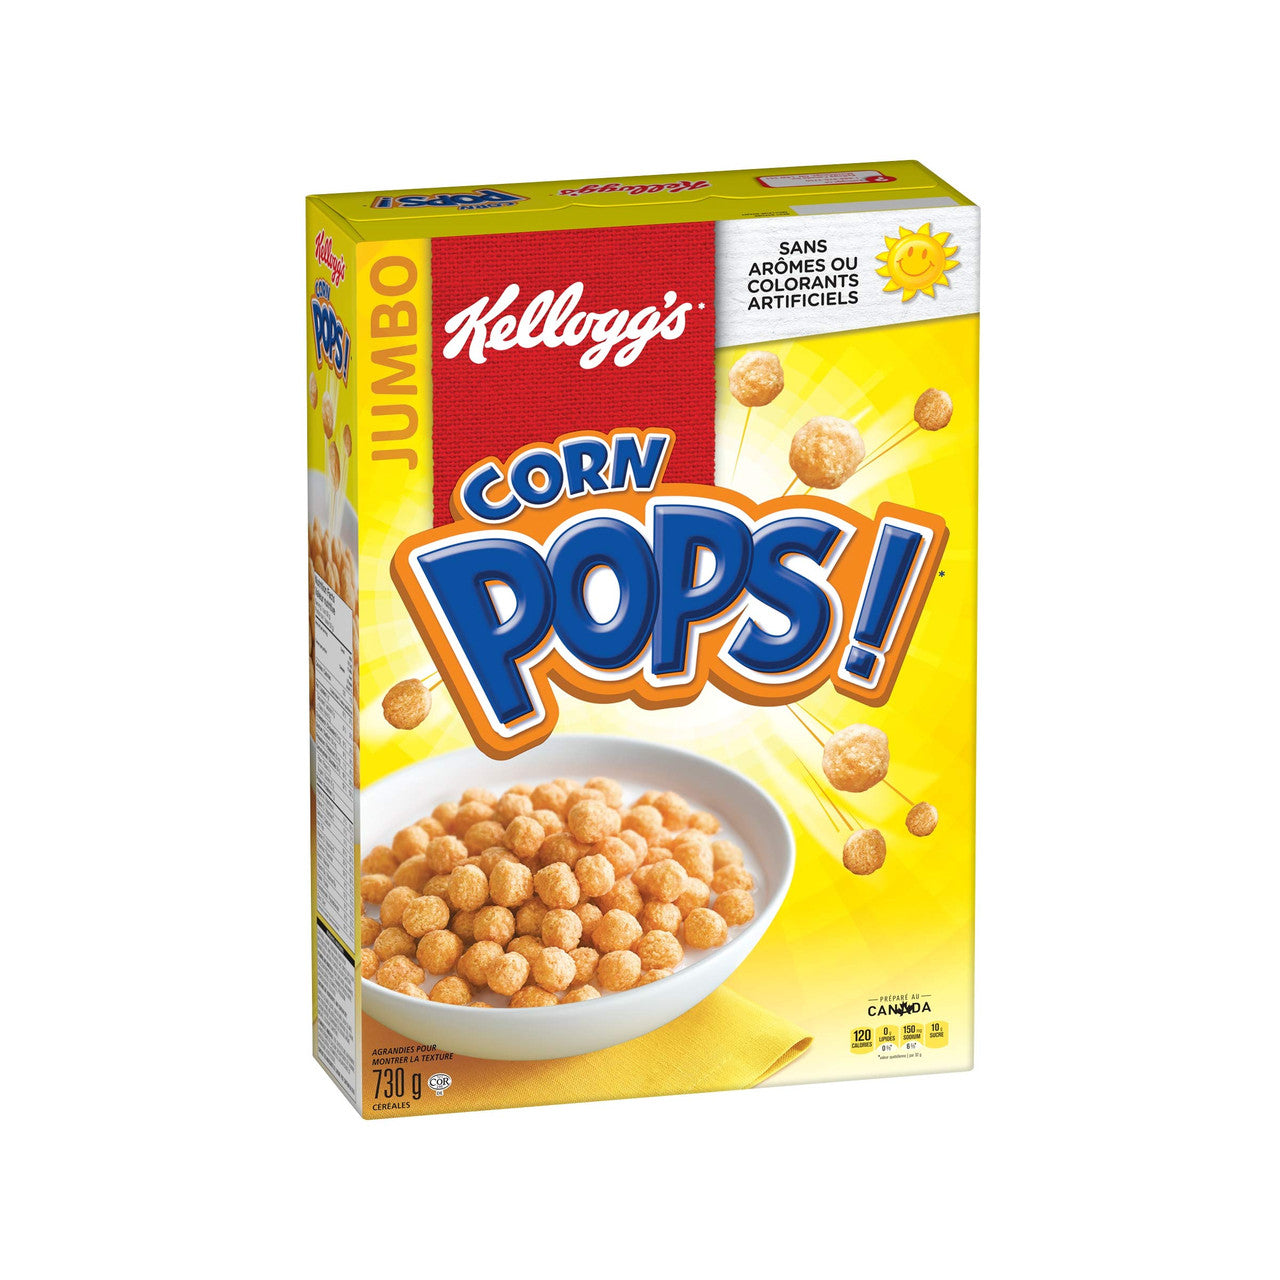 Kellogg's Corn Pops Cereal Jumbo Size 730g/25.8 oz., {Imported from Canada}